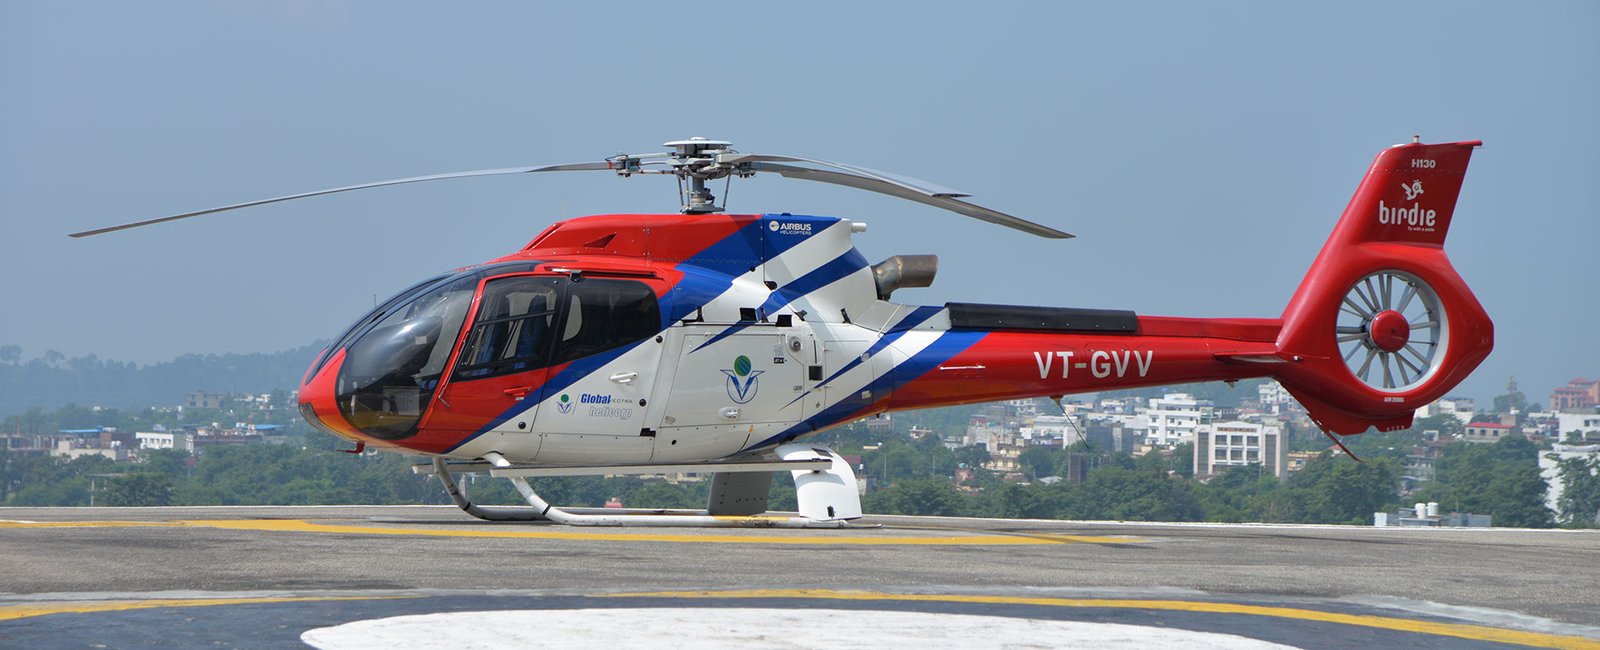 Amarnath Yatra Helicopter Tickets